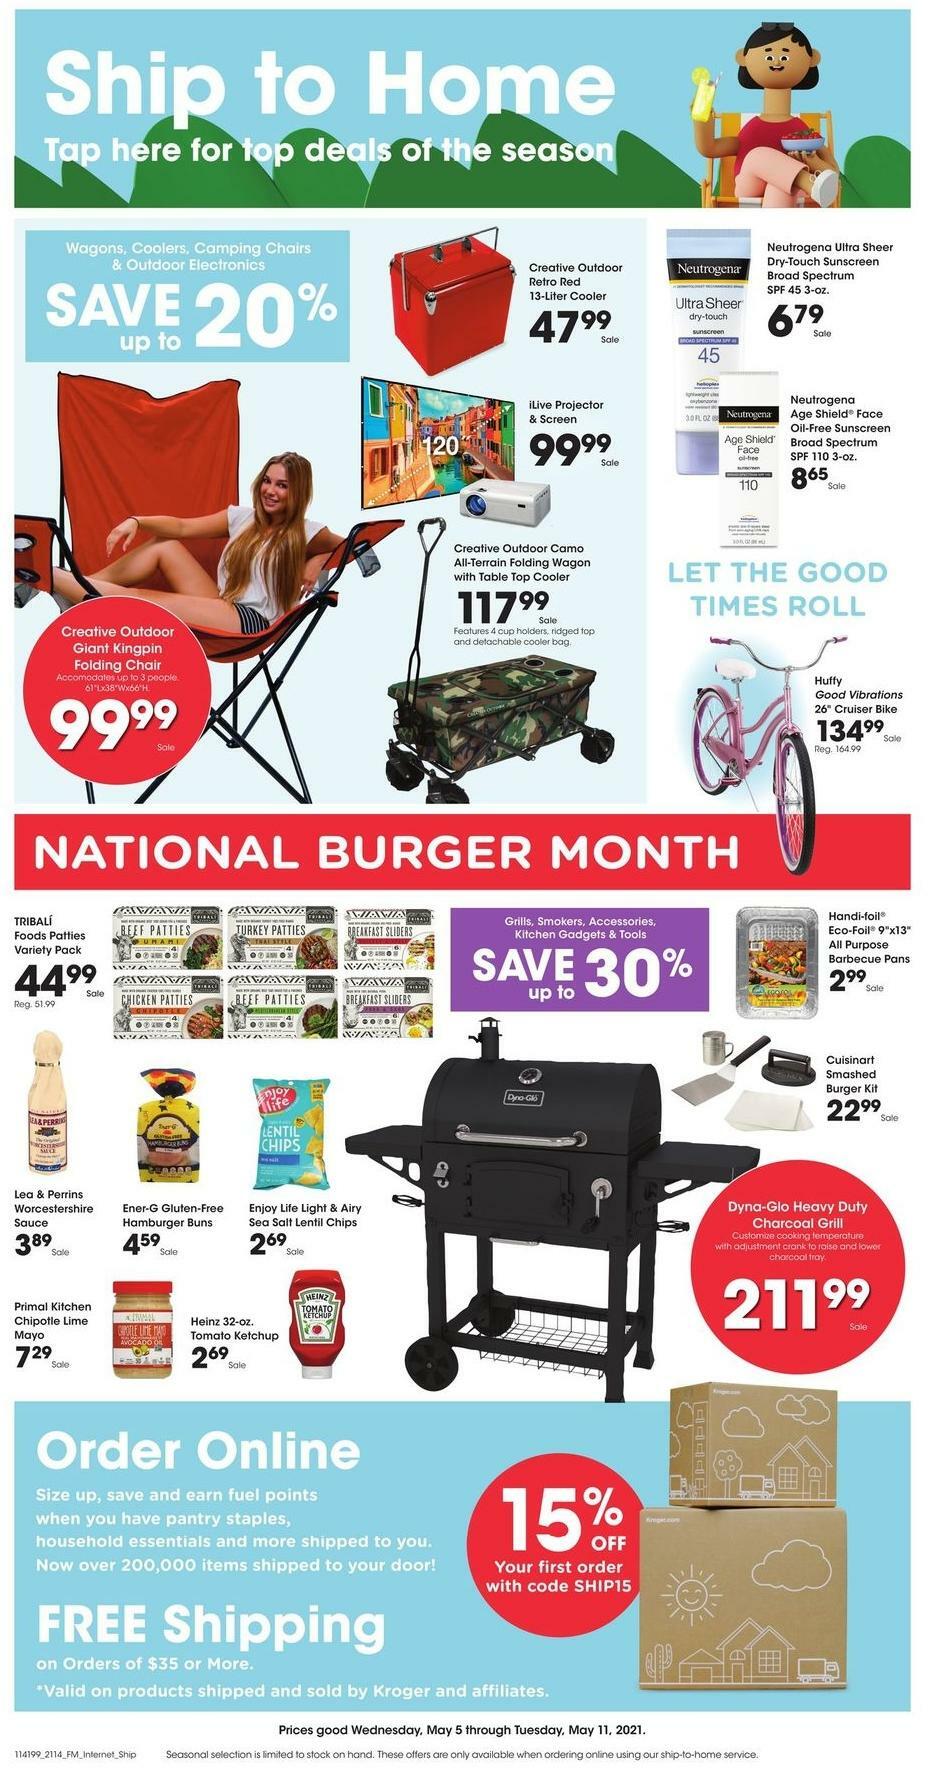 Fred Meyer Weekly Ad from May 5